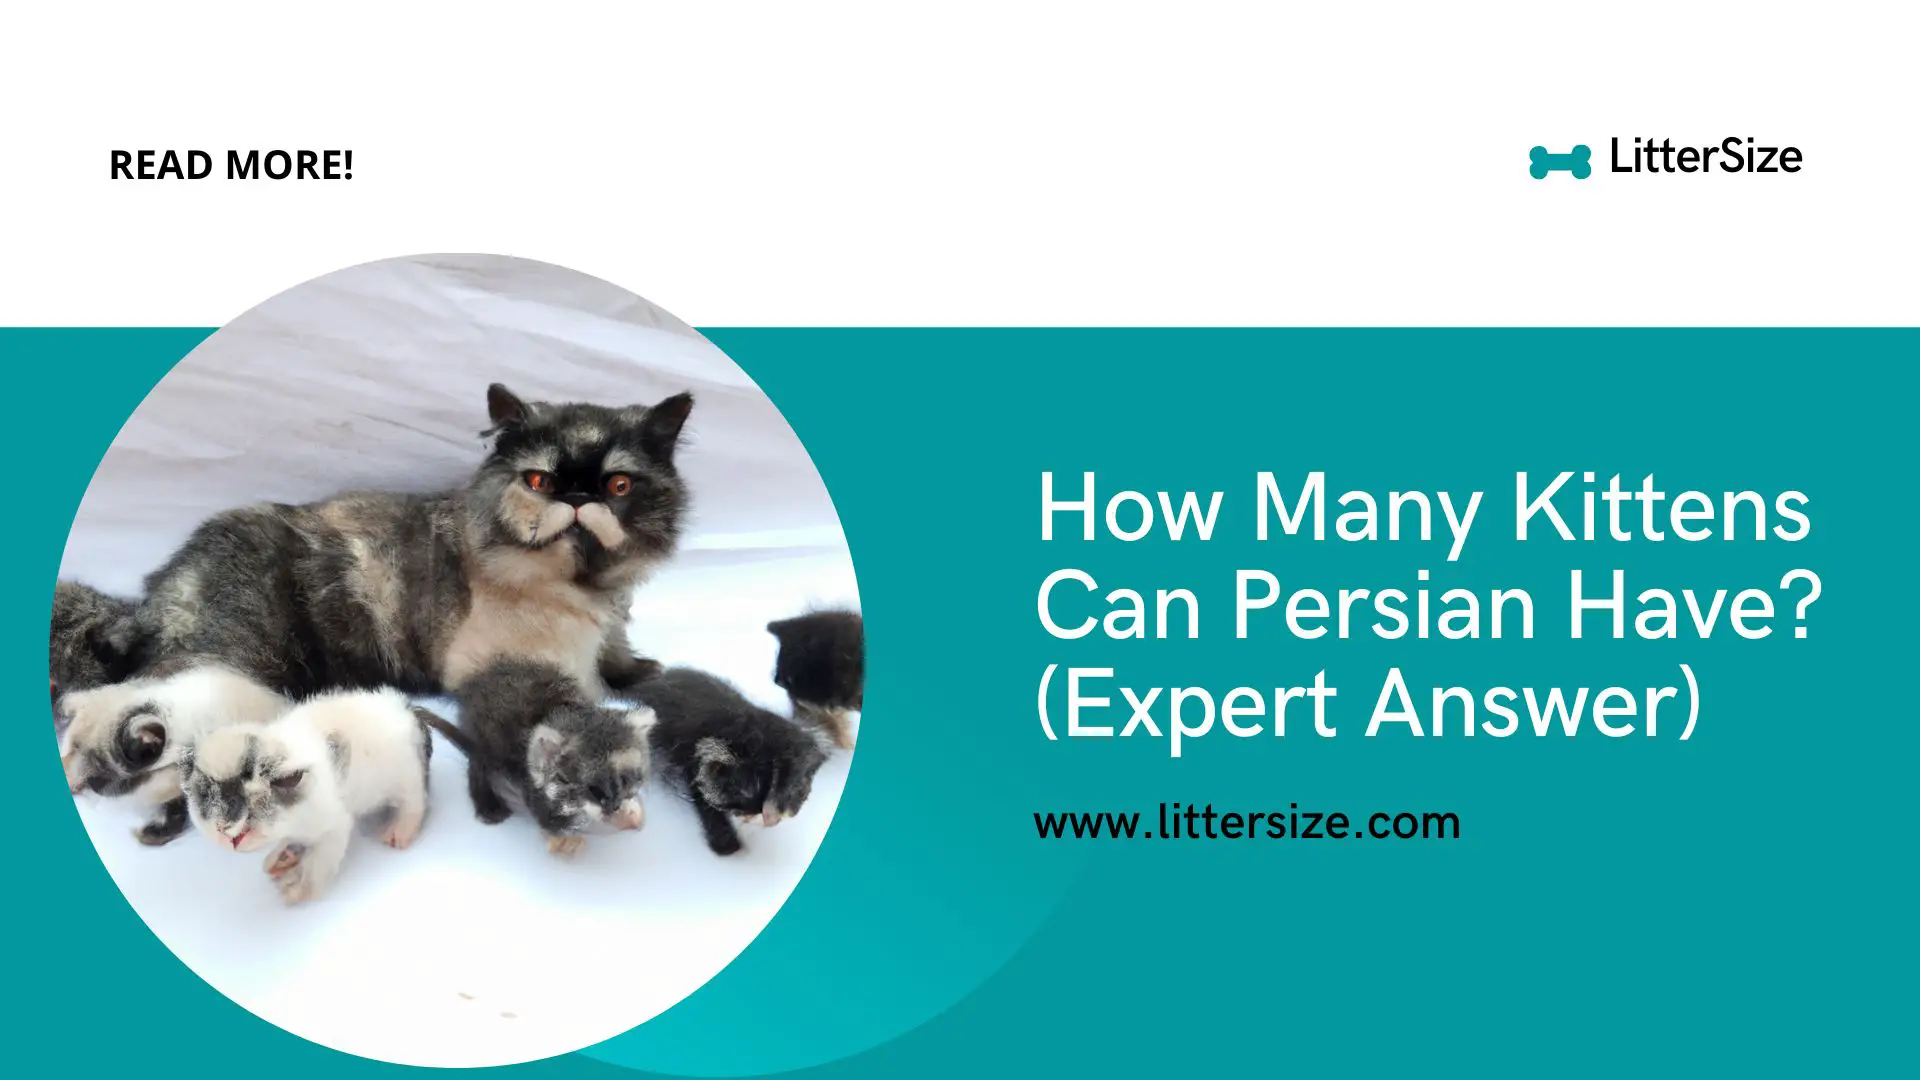 How Many Kittens Can Persian Have? (Expert Answer)